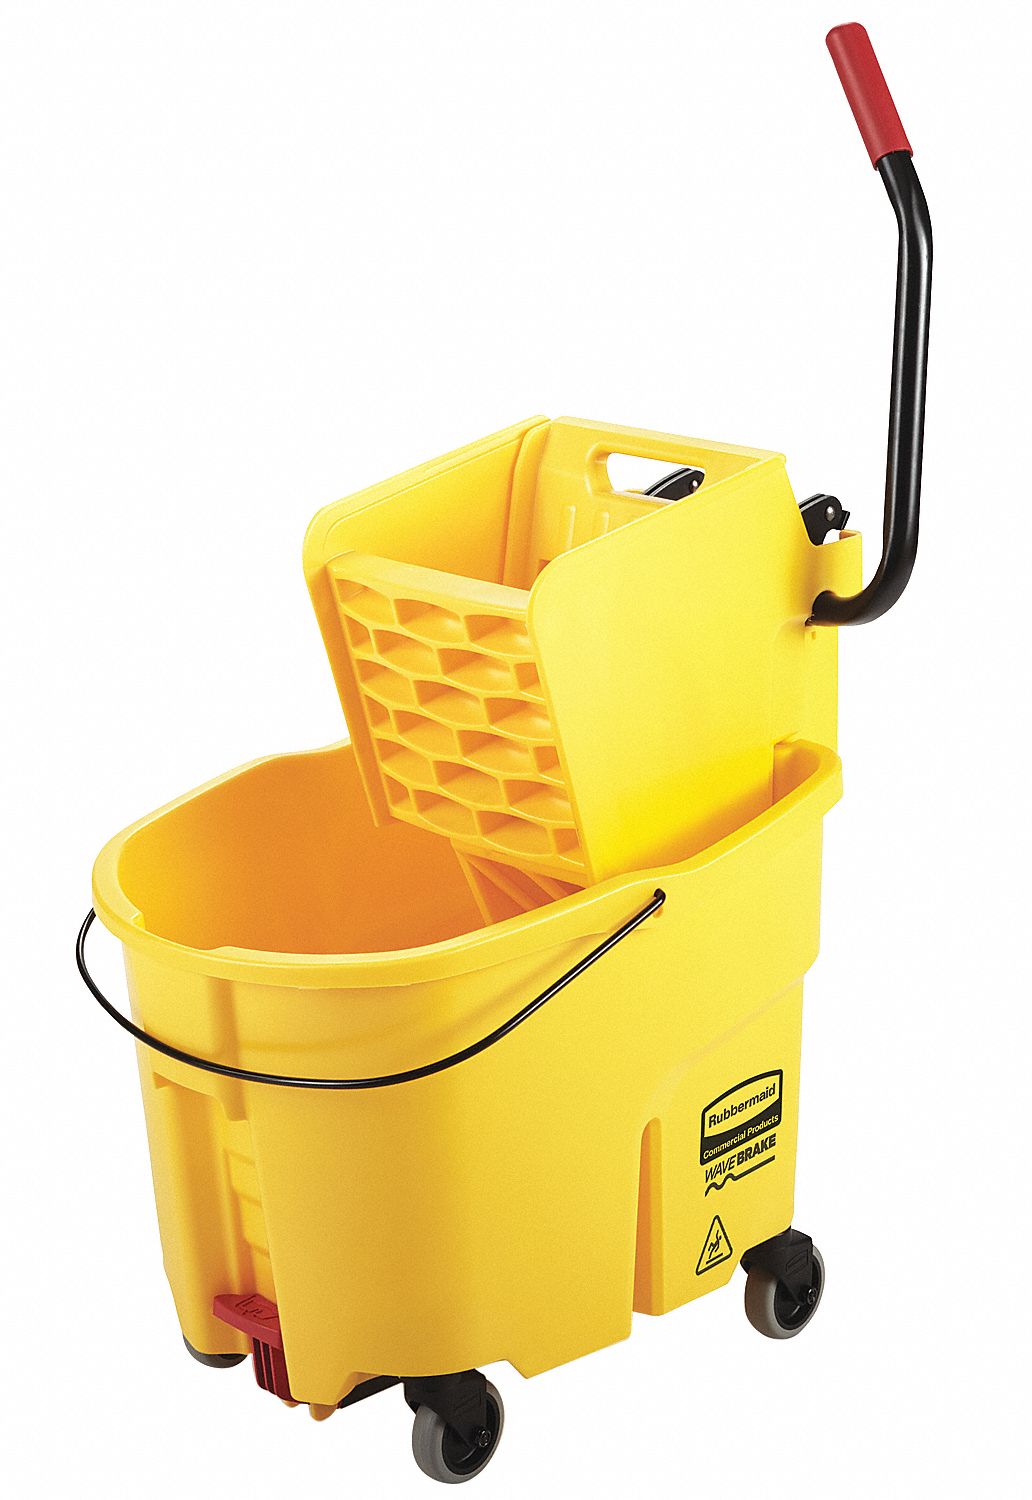 NEW 4 CASTERS FOR RUBBERMAID MOP BUCKETS